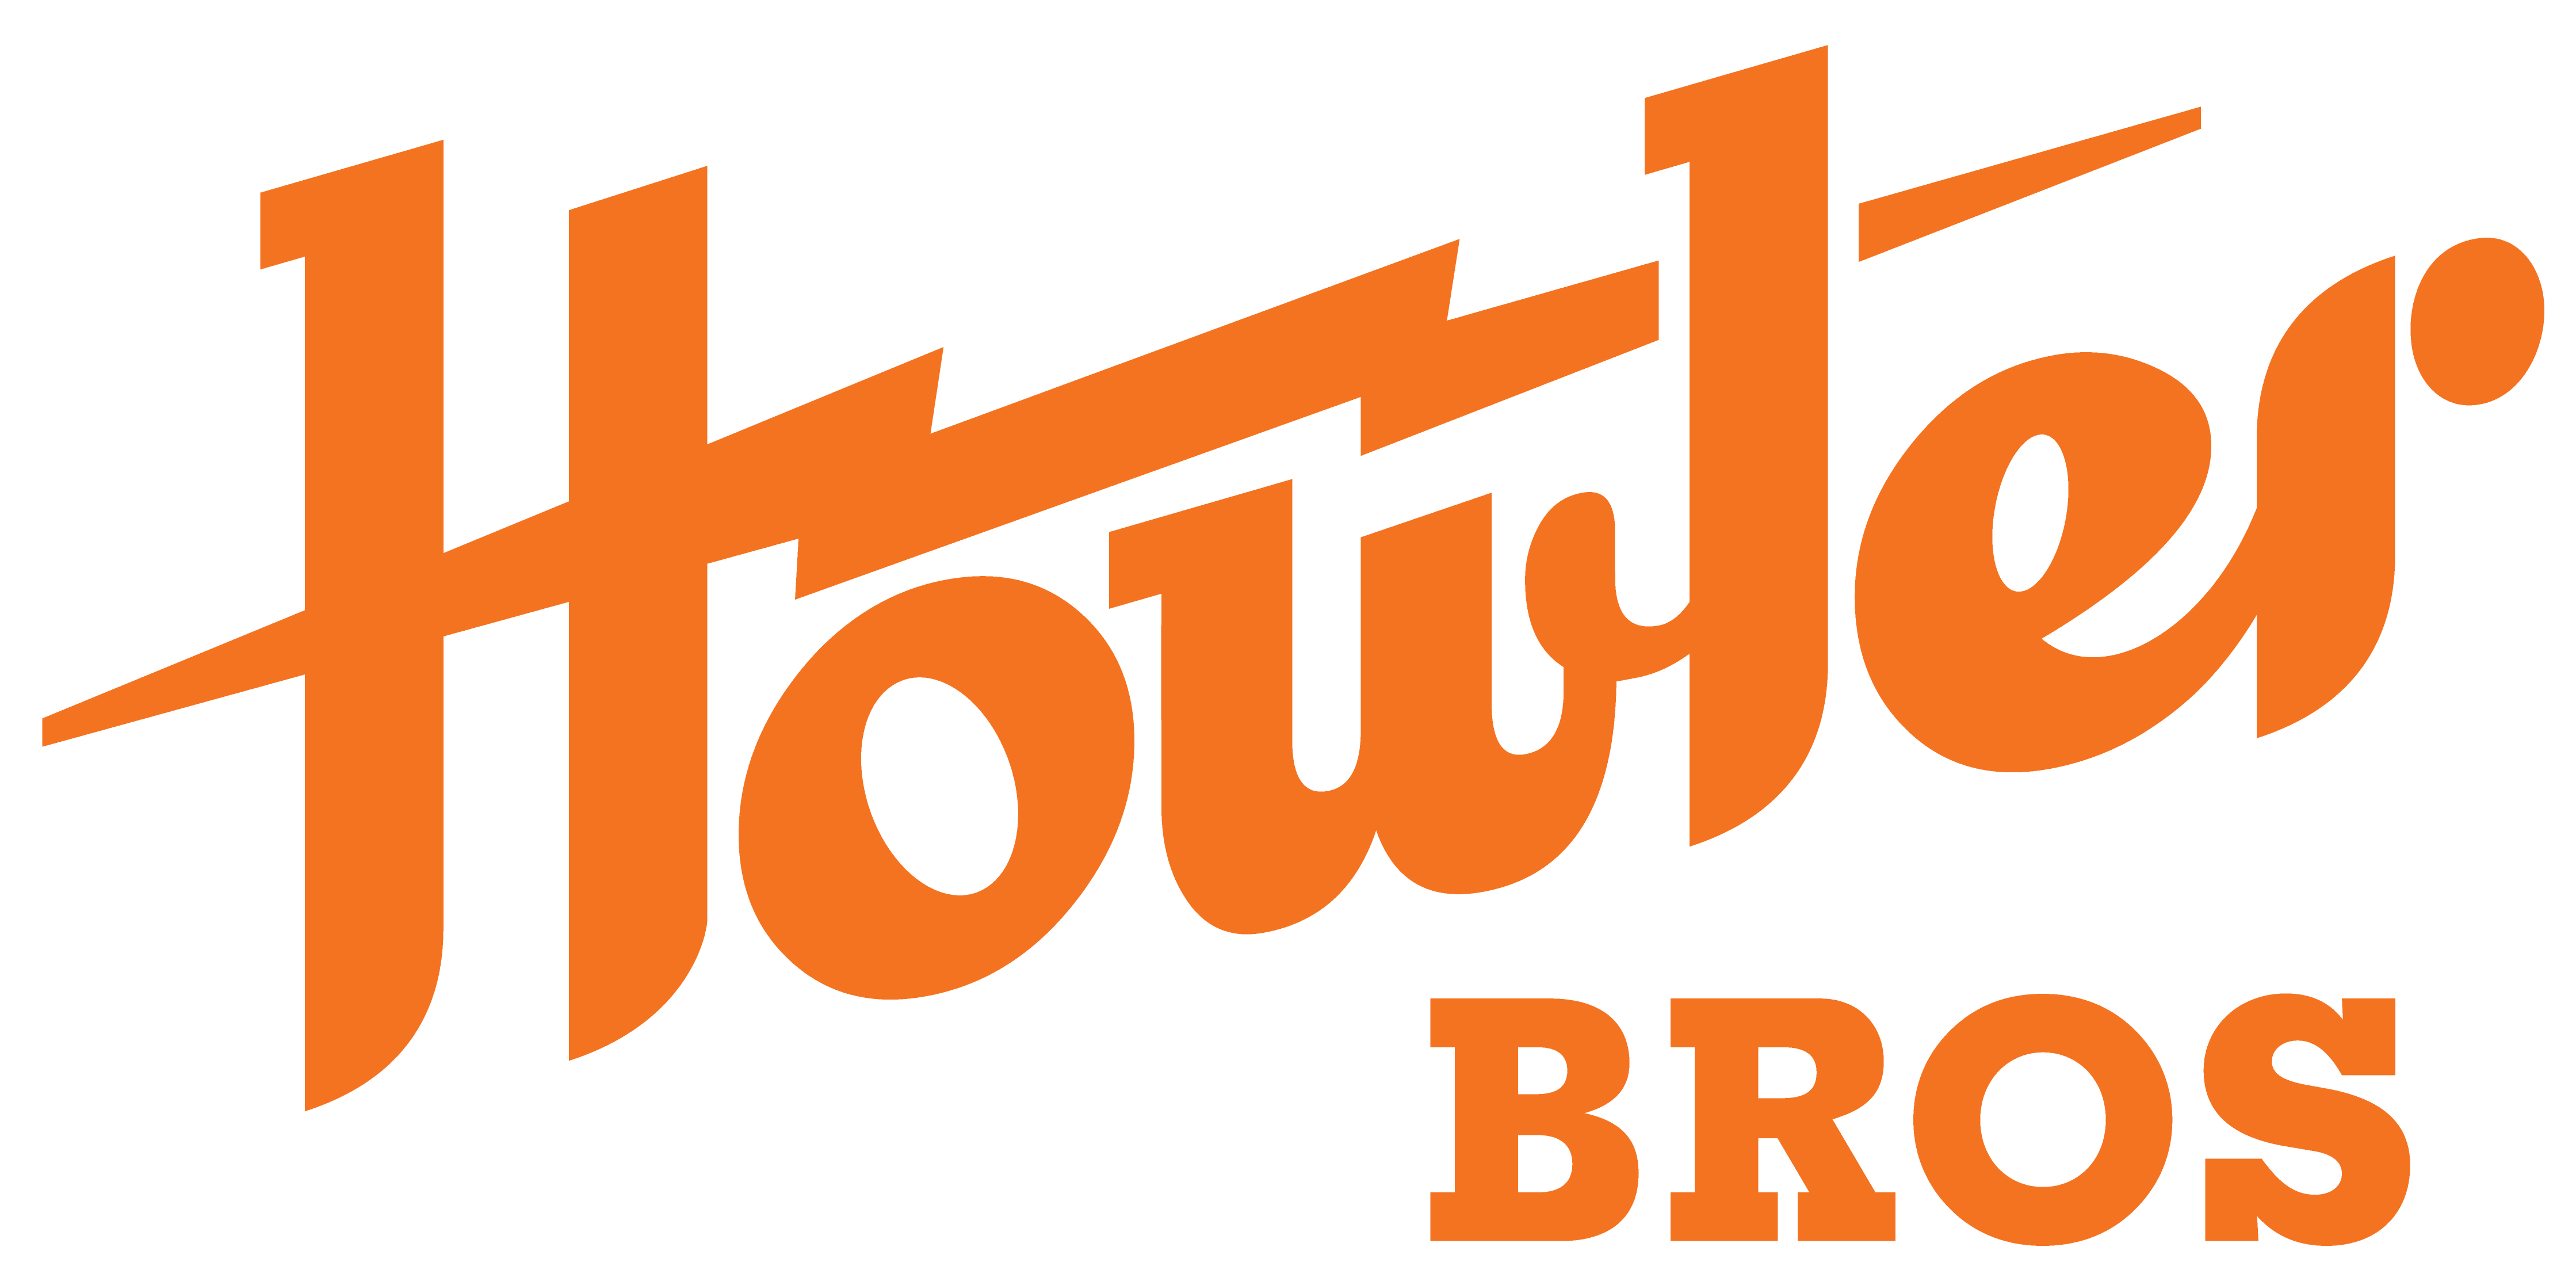 Howler Brothers_logo